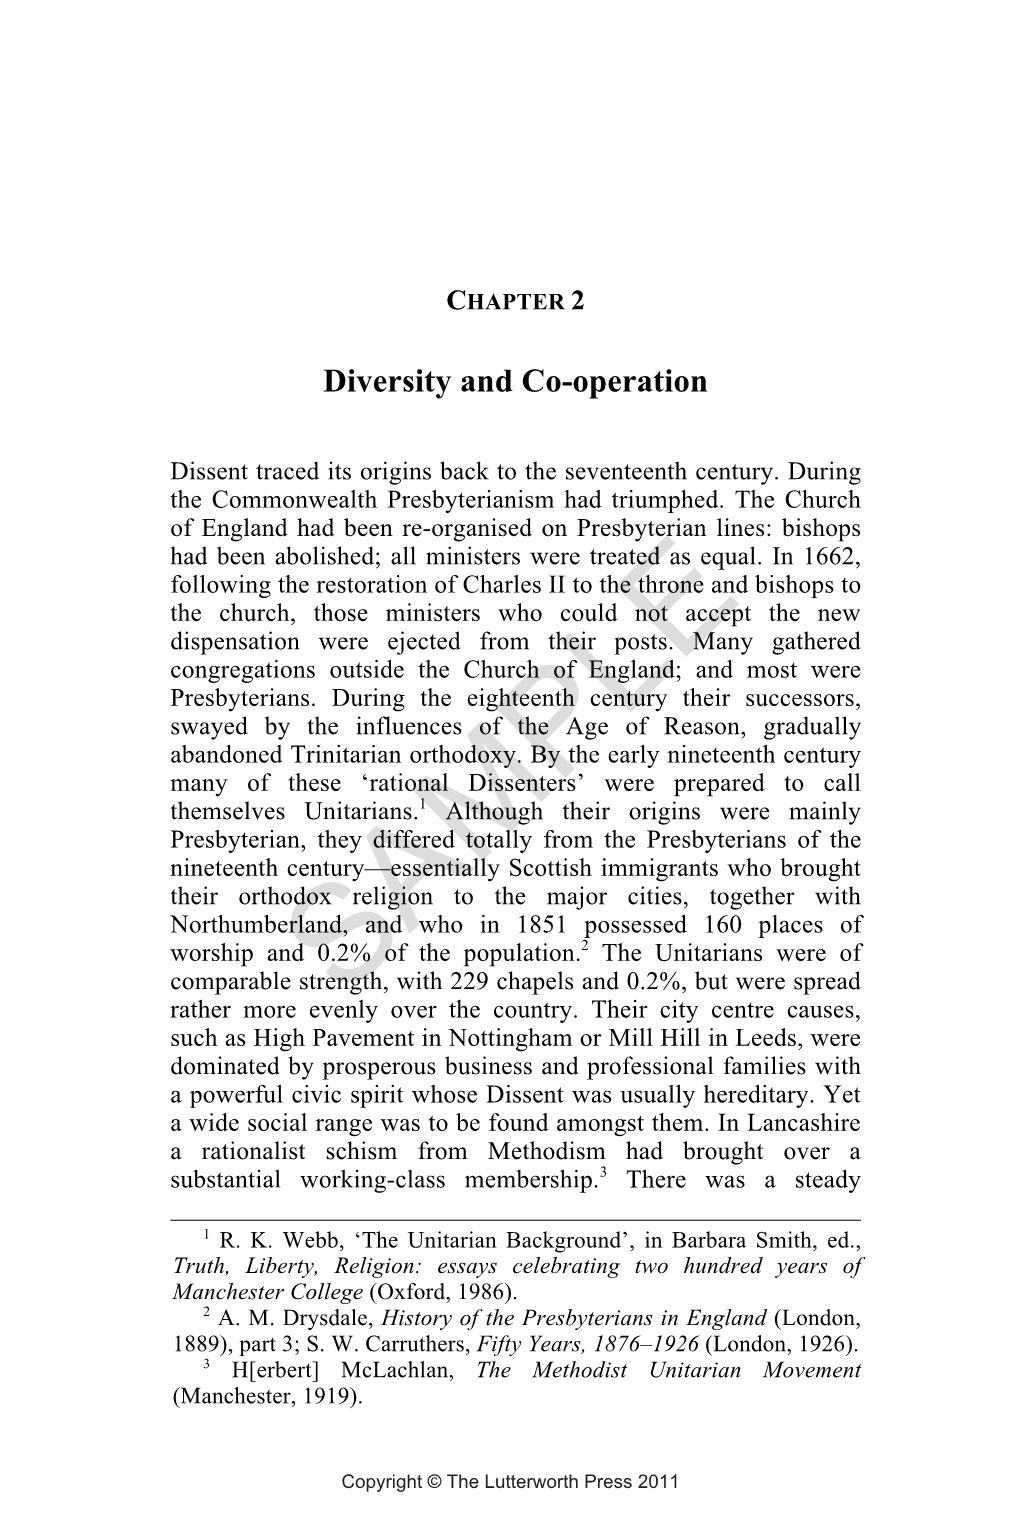 Diversity and Co-Operation